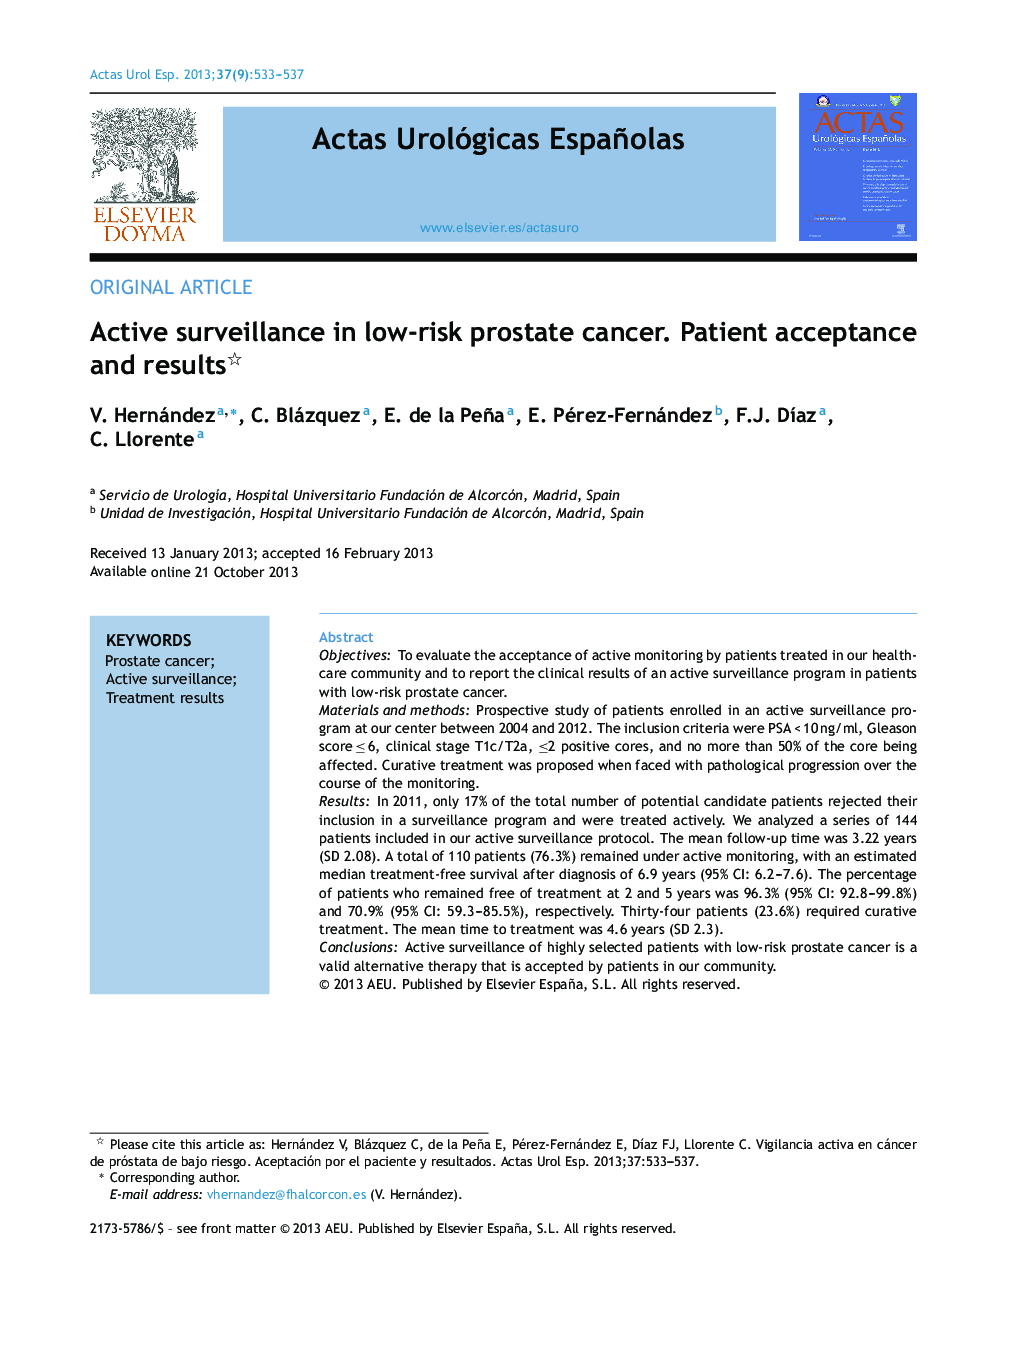 Active surveillance in low-risk prostate cancer. Patient acceptance and results 